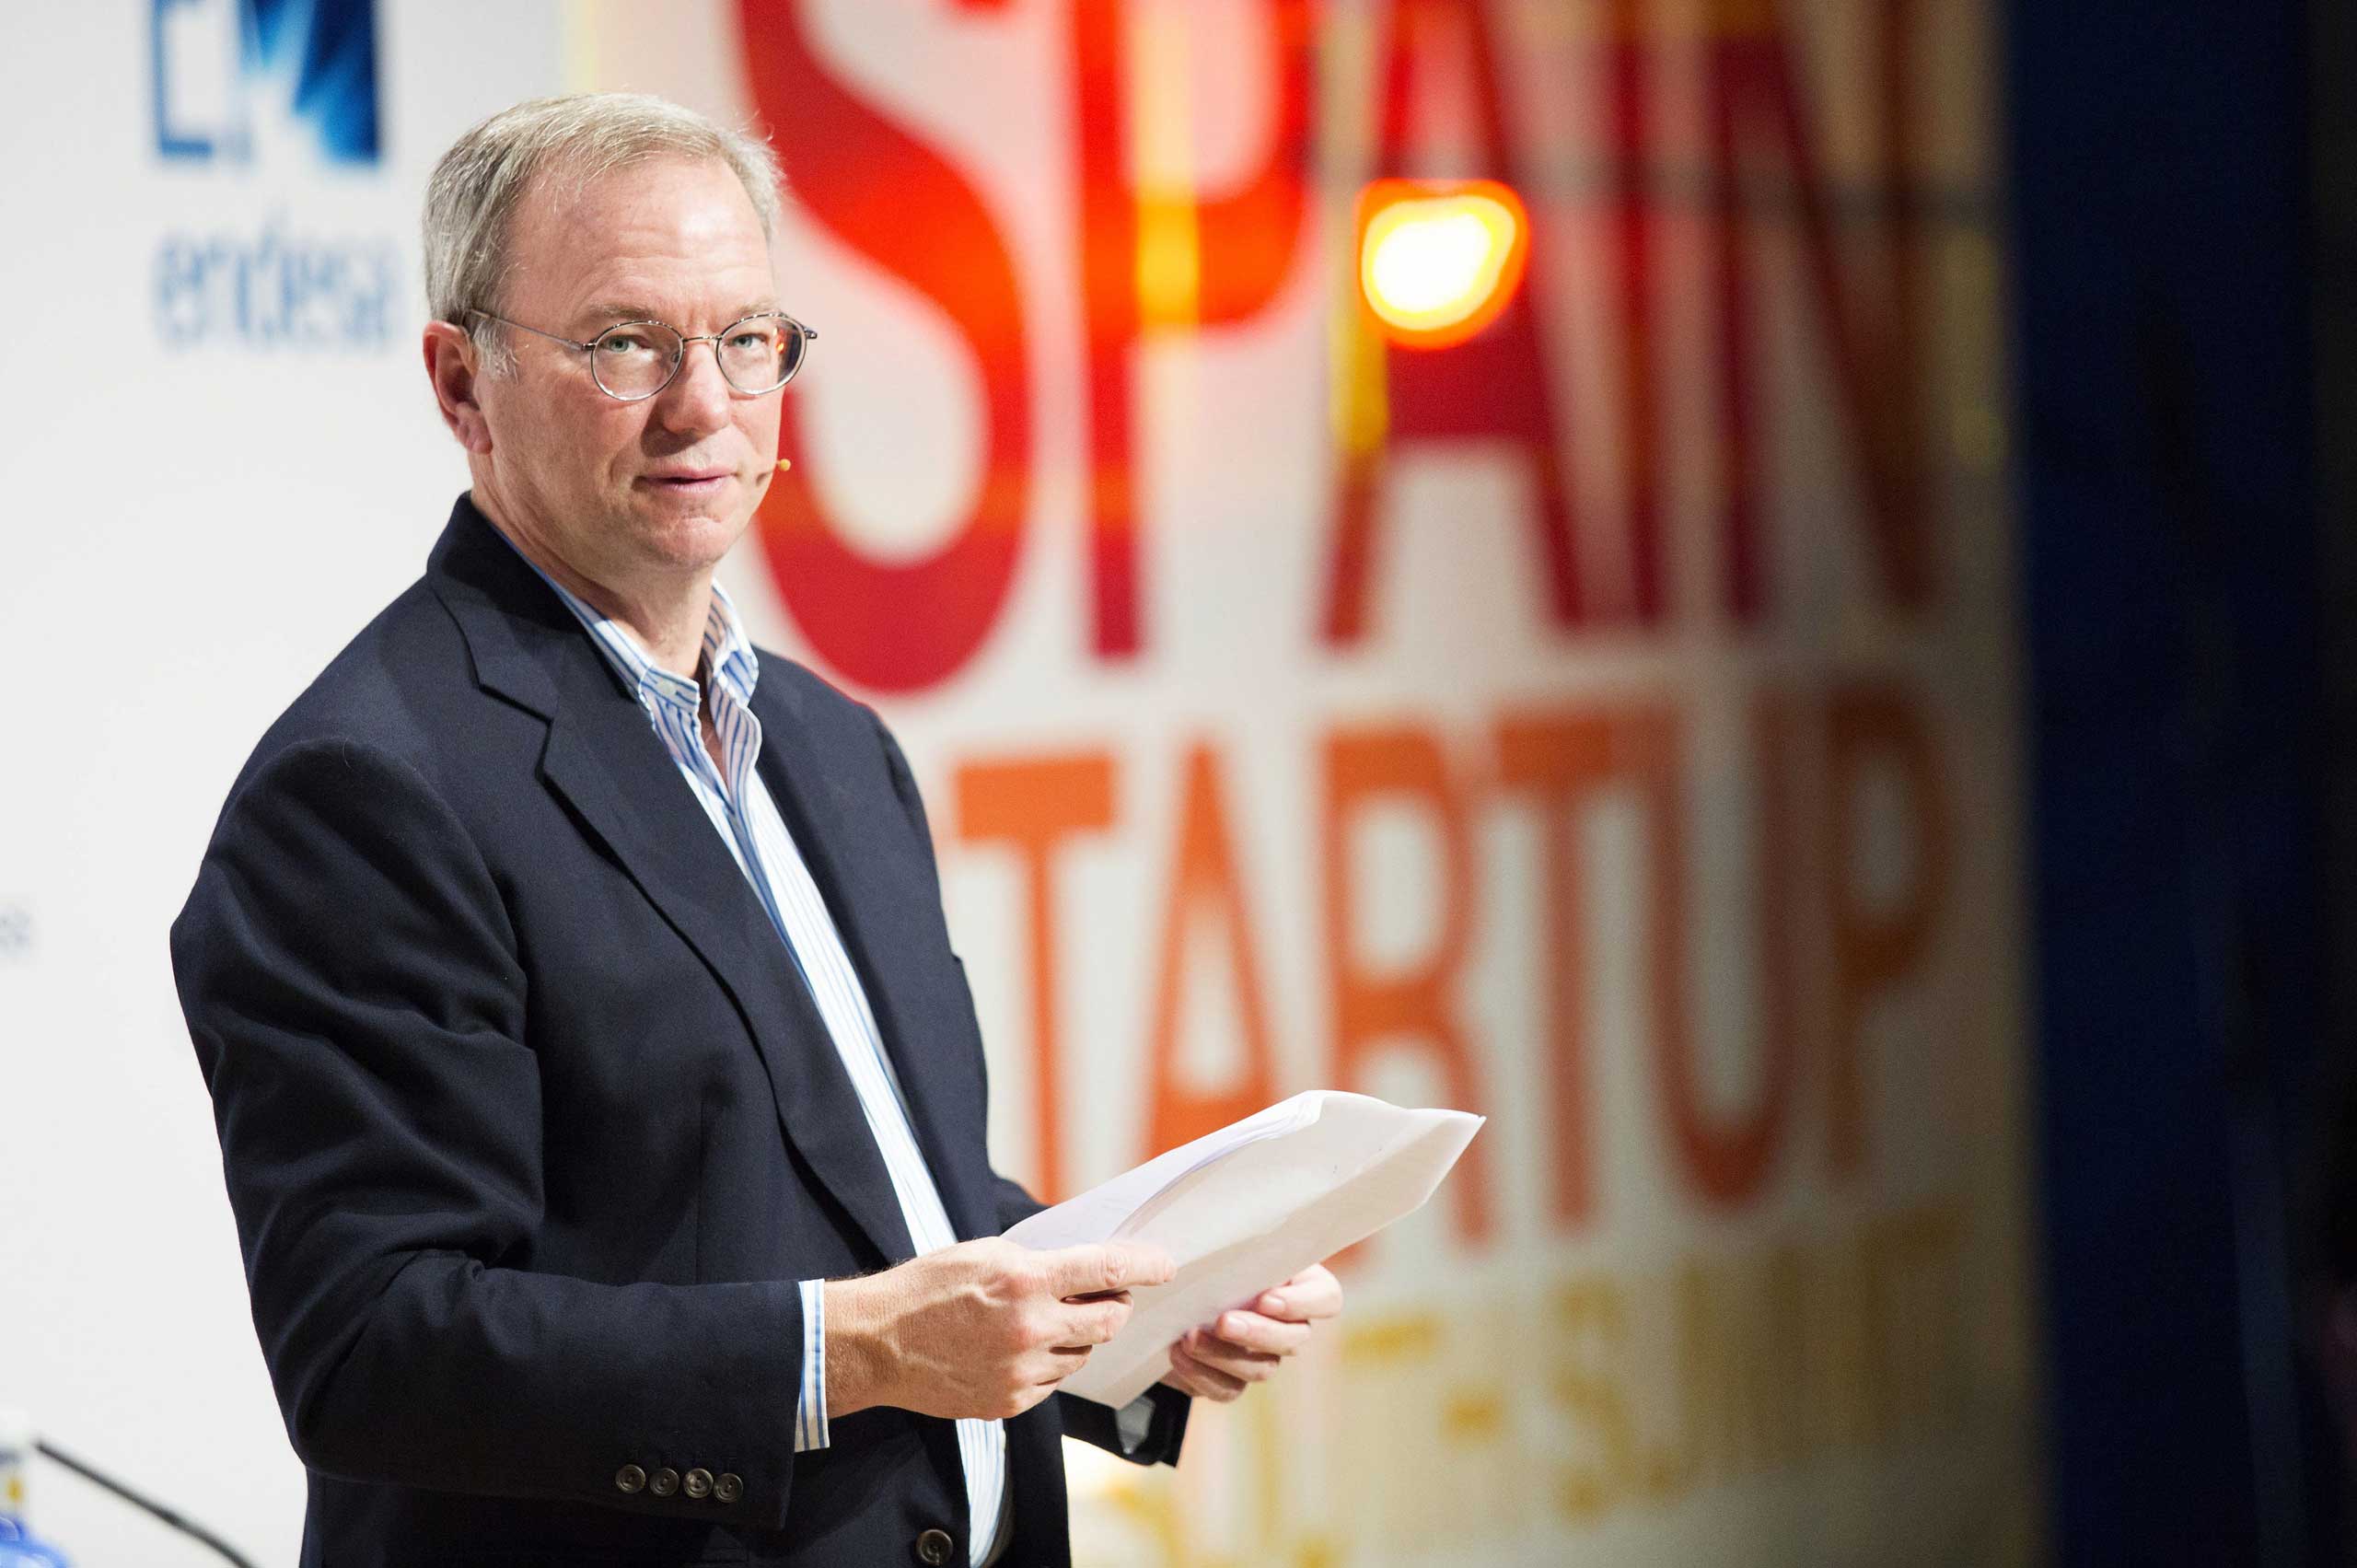 Google Executive Chairman Eric Schmidt speaks at the 'The South Summit'- Spain Start-Up convention at Las Ventas bullring in Madrid on Oct. 10, 2014. (Geisler-Fotopress/DPA/Corbis)